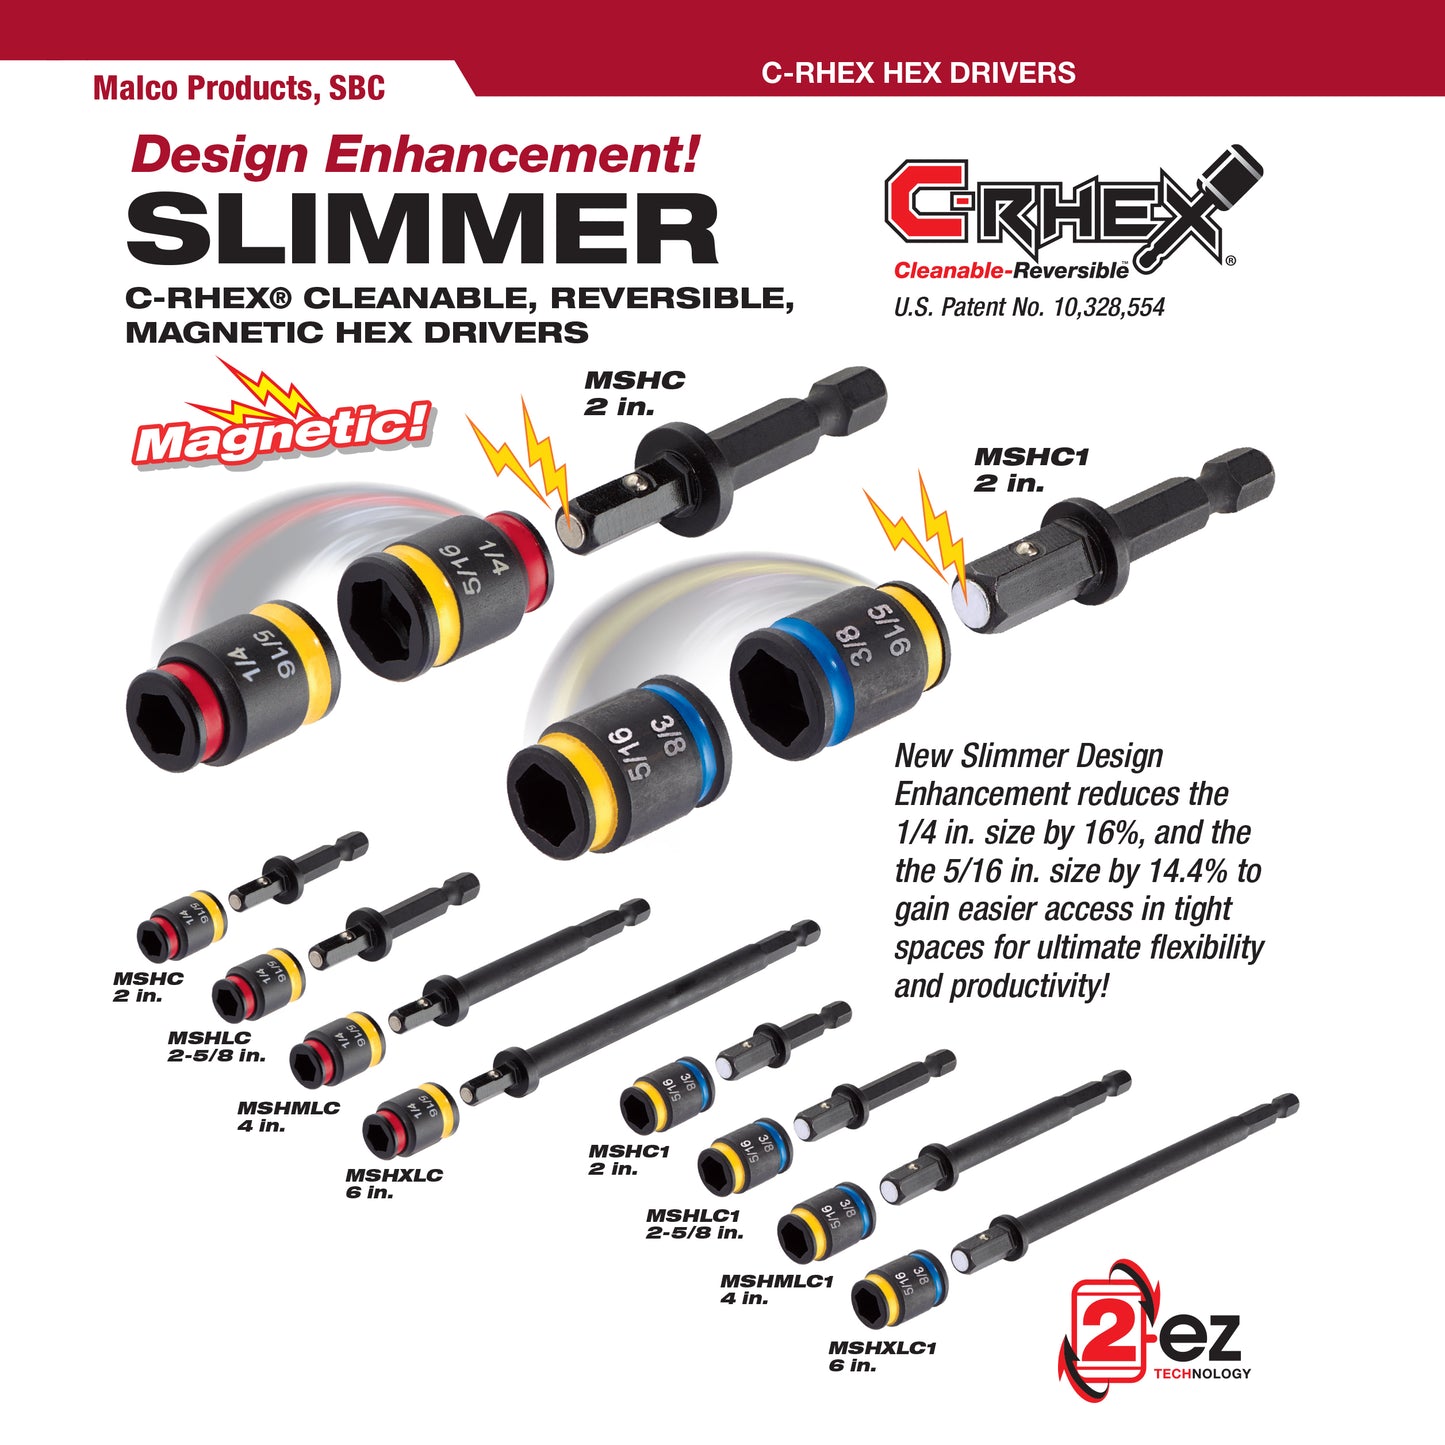 MSHC1 - C-RHEX Cleanable, Reversible Magnetic Hex Drivers, 5/16" and 3/8", 2" Length